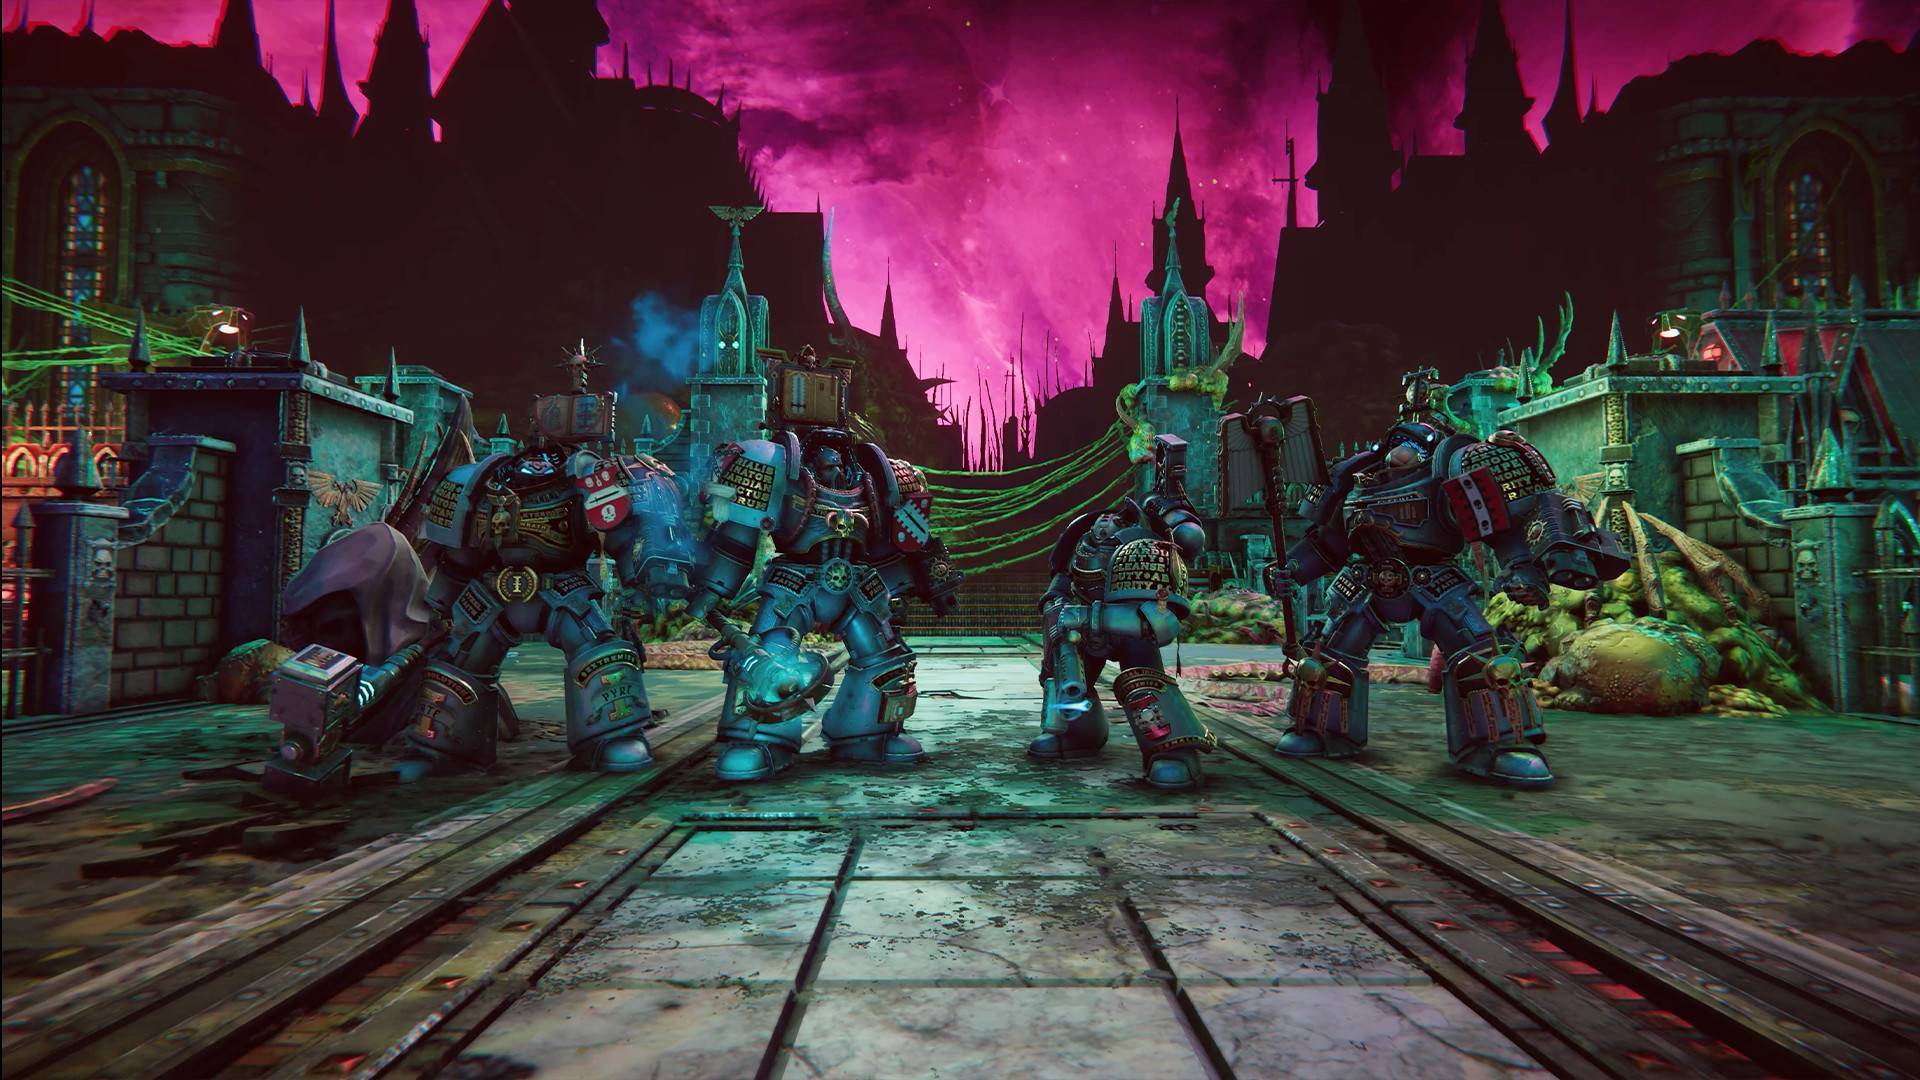 download the last version for windows Warhammer 40,000: Chaos Gate - Daemonhunters